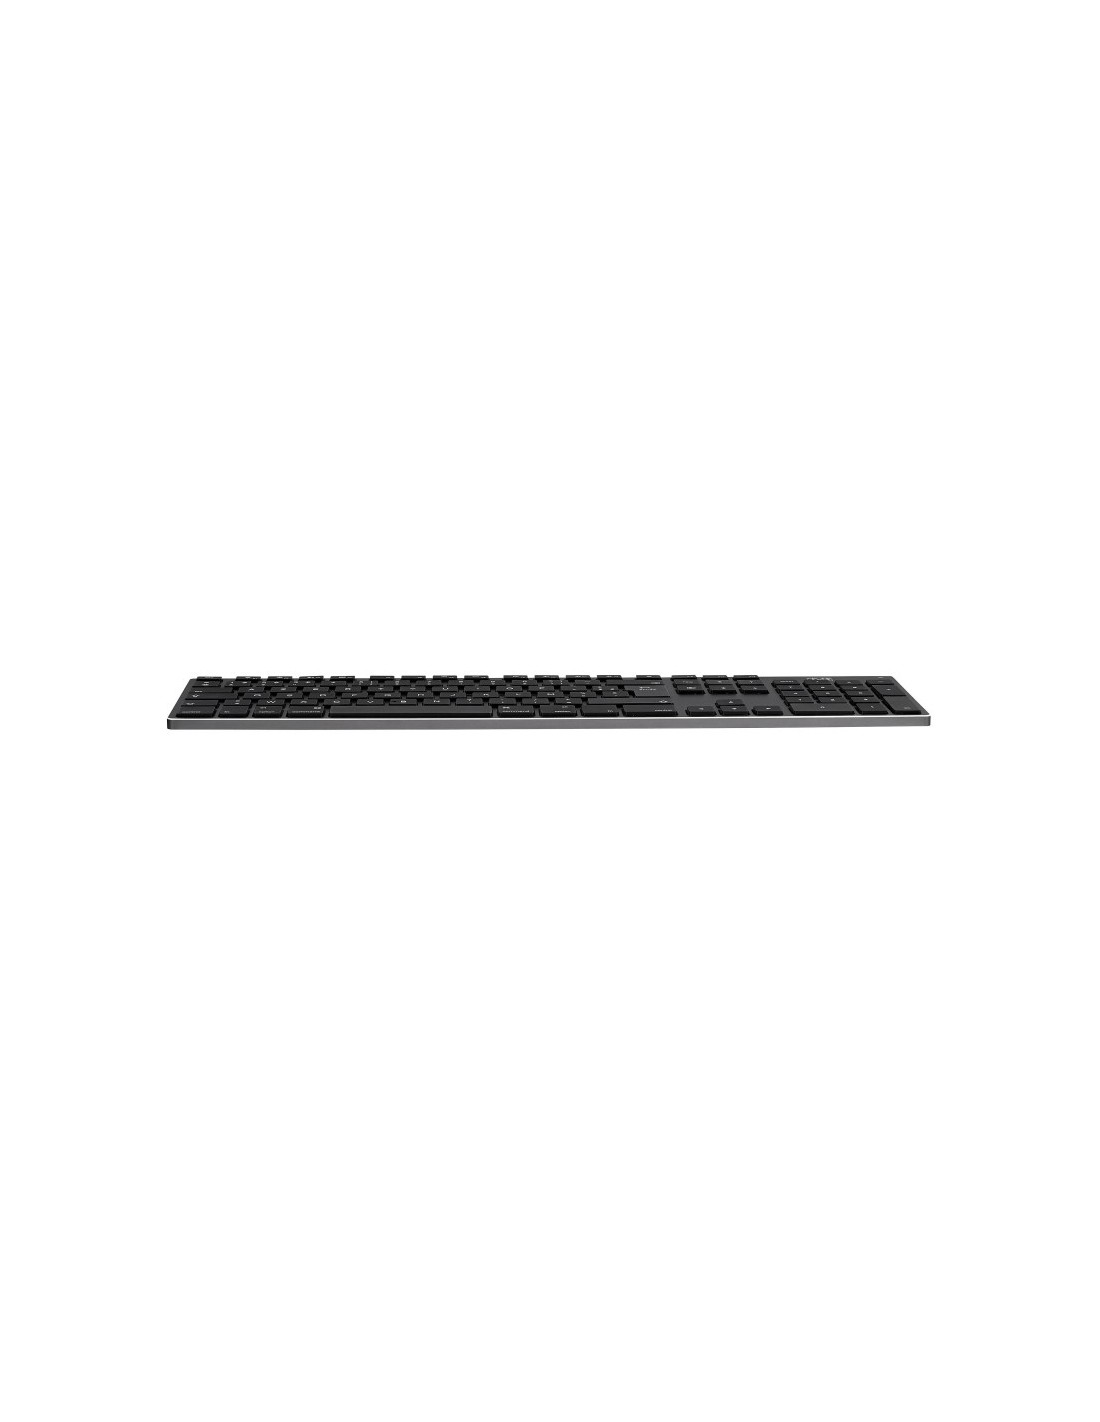 Clavier Bluetooth rechargeable pour mac iClick - T'nB